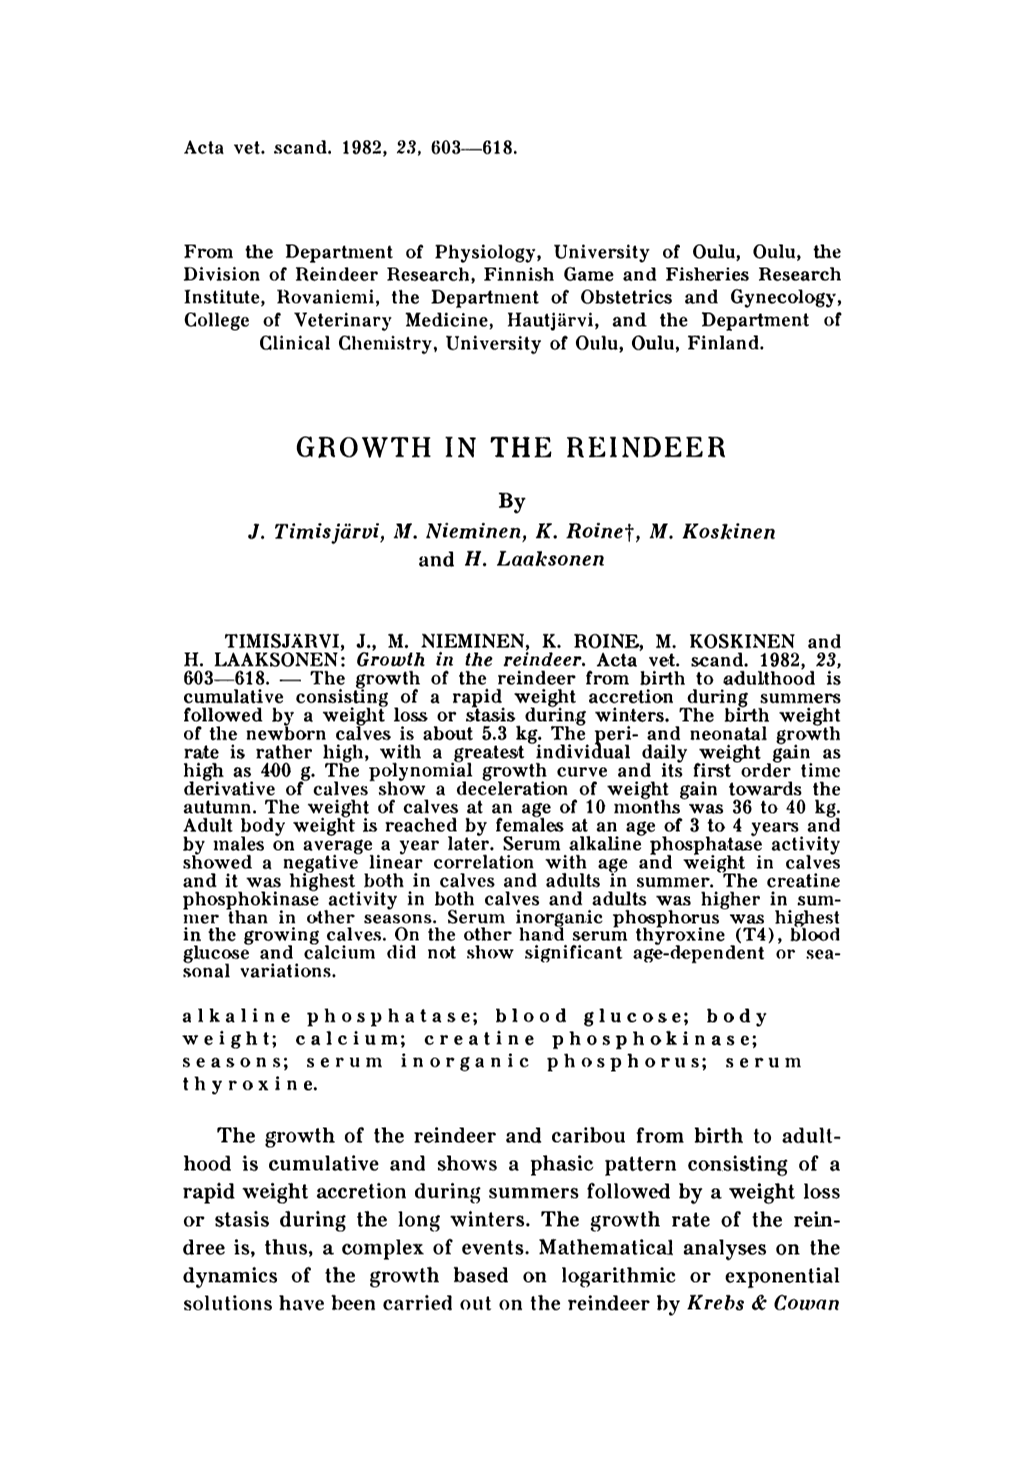 Growth in the Reindeer